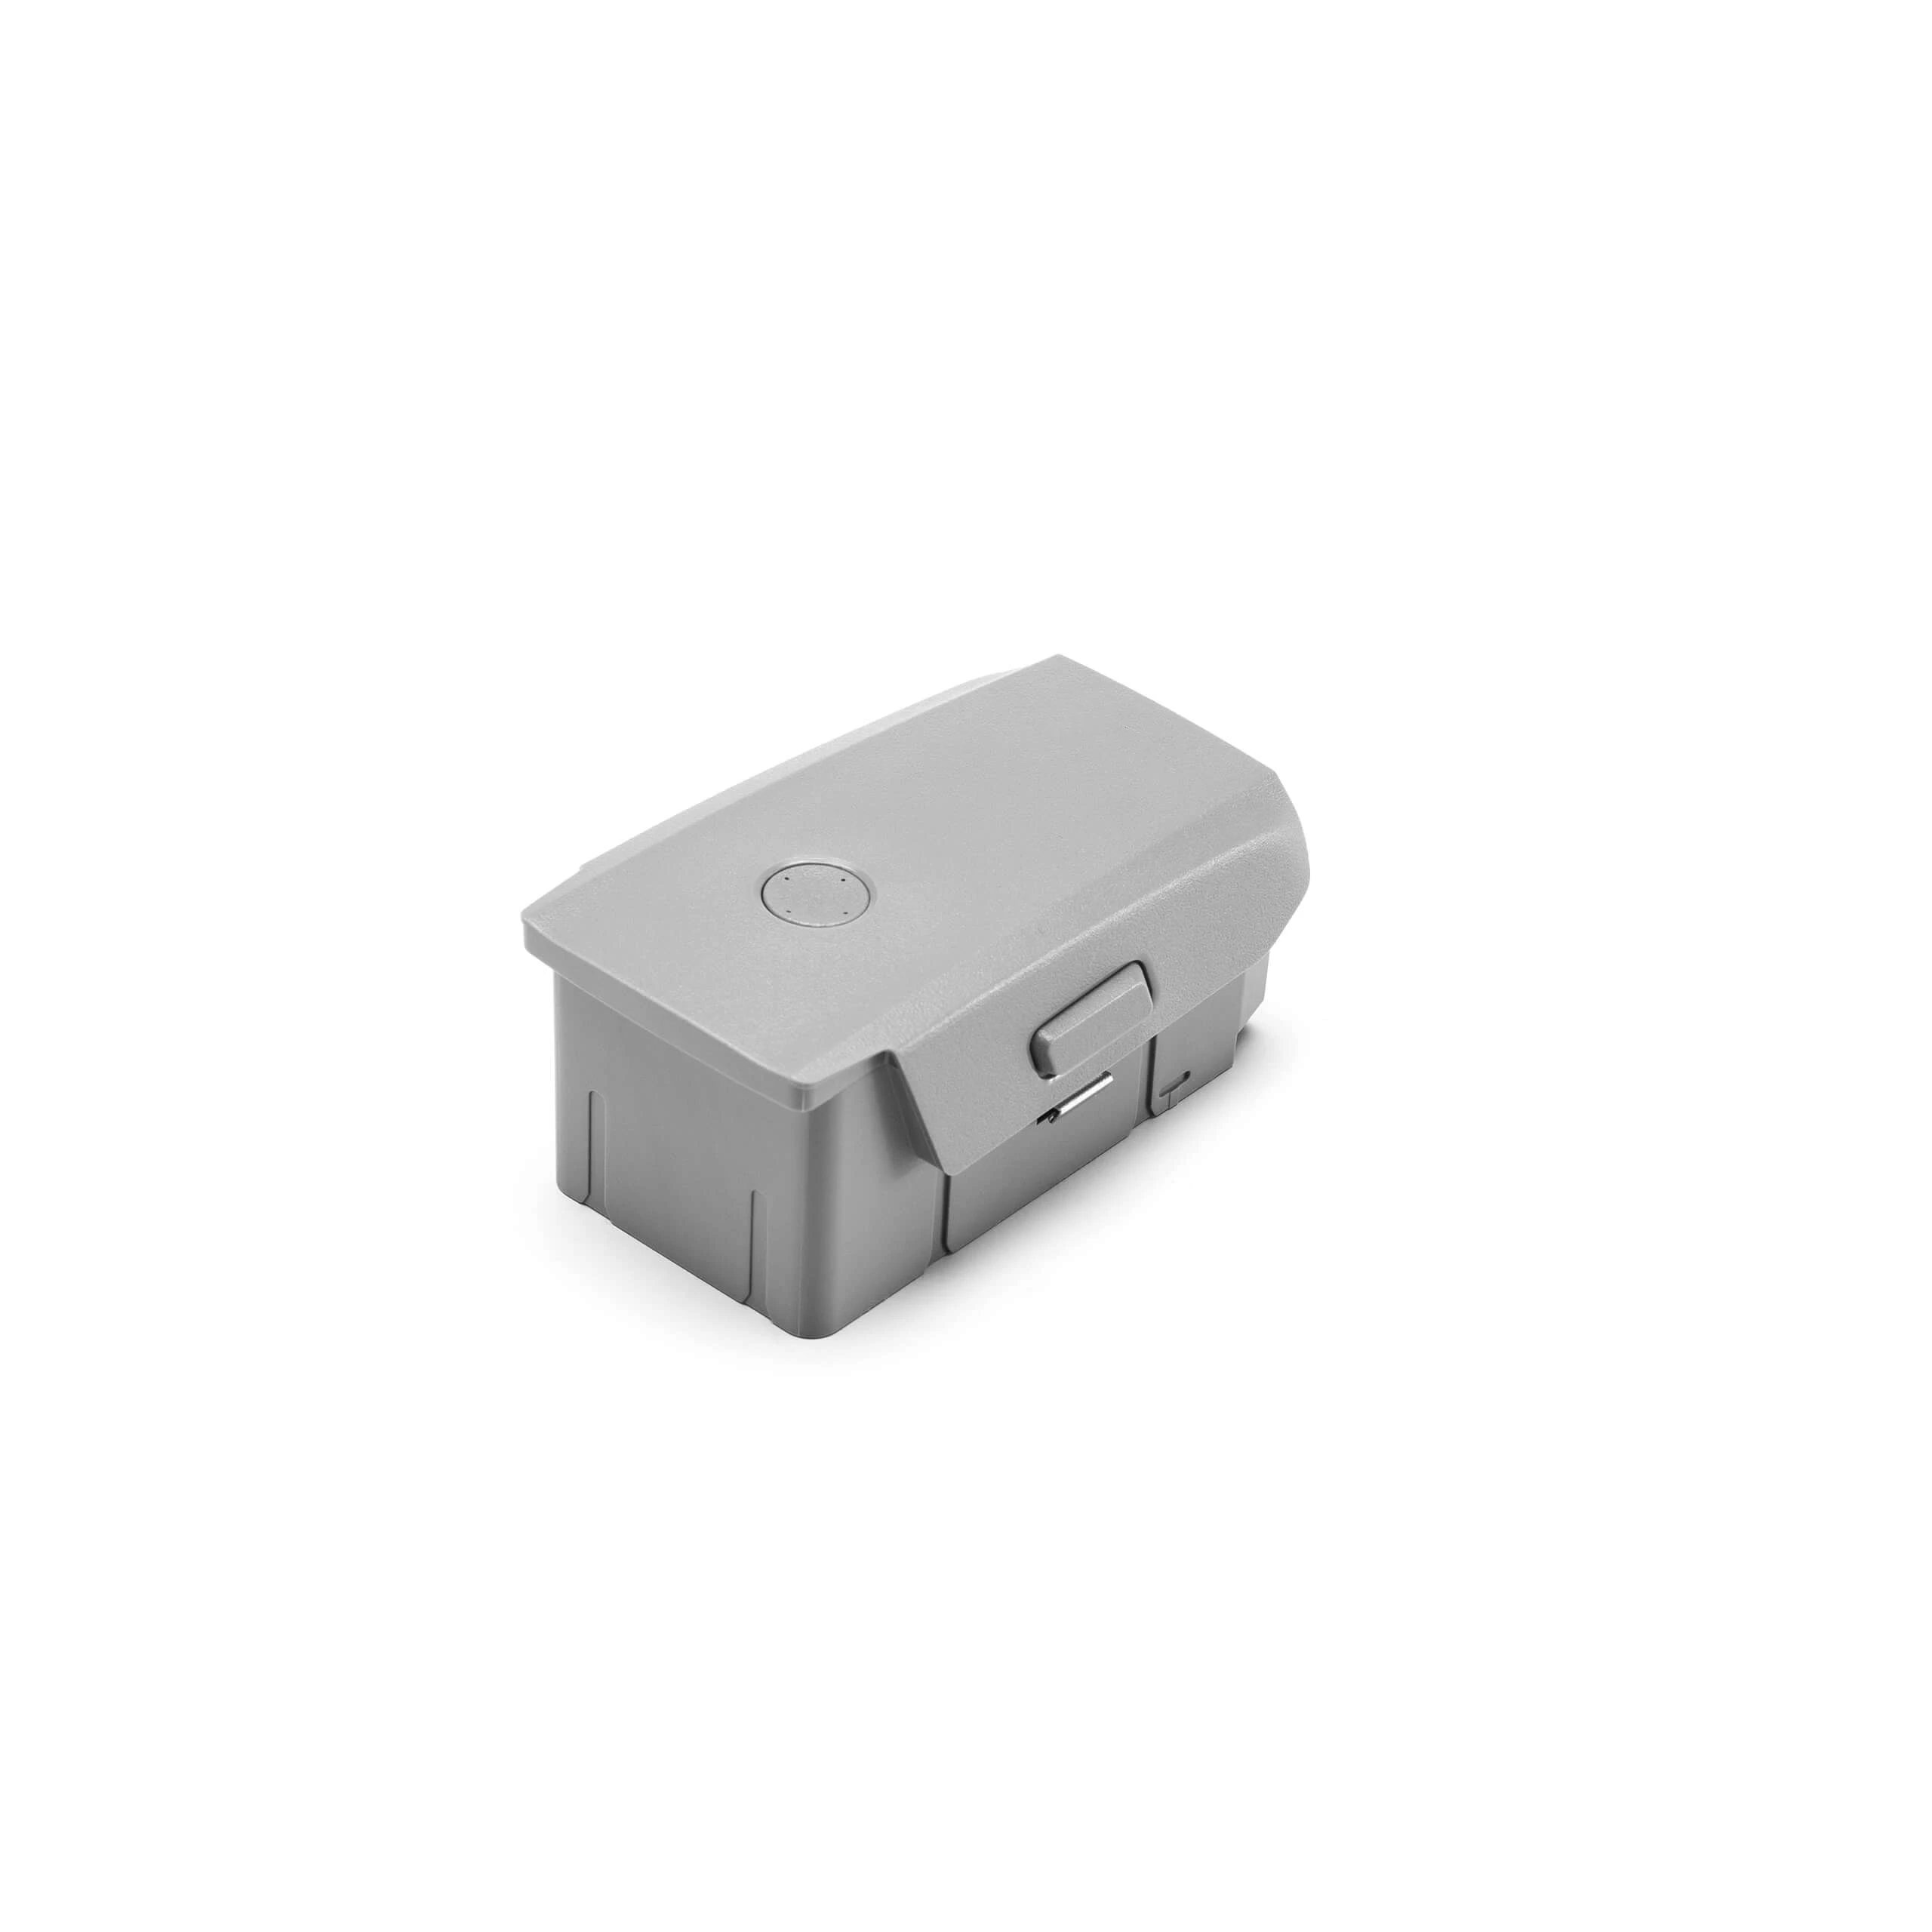 DJI Mavic Air2 Battery, it has functions such as overcharge/overdischarge protection, idle protection and low temperature